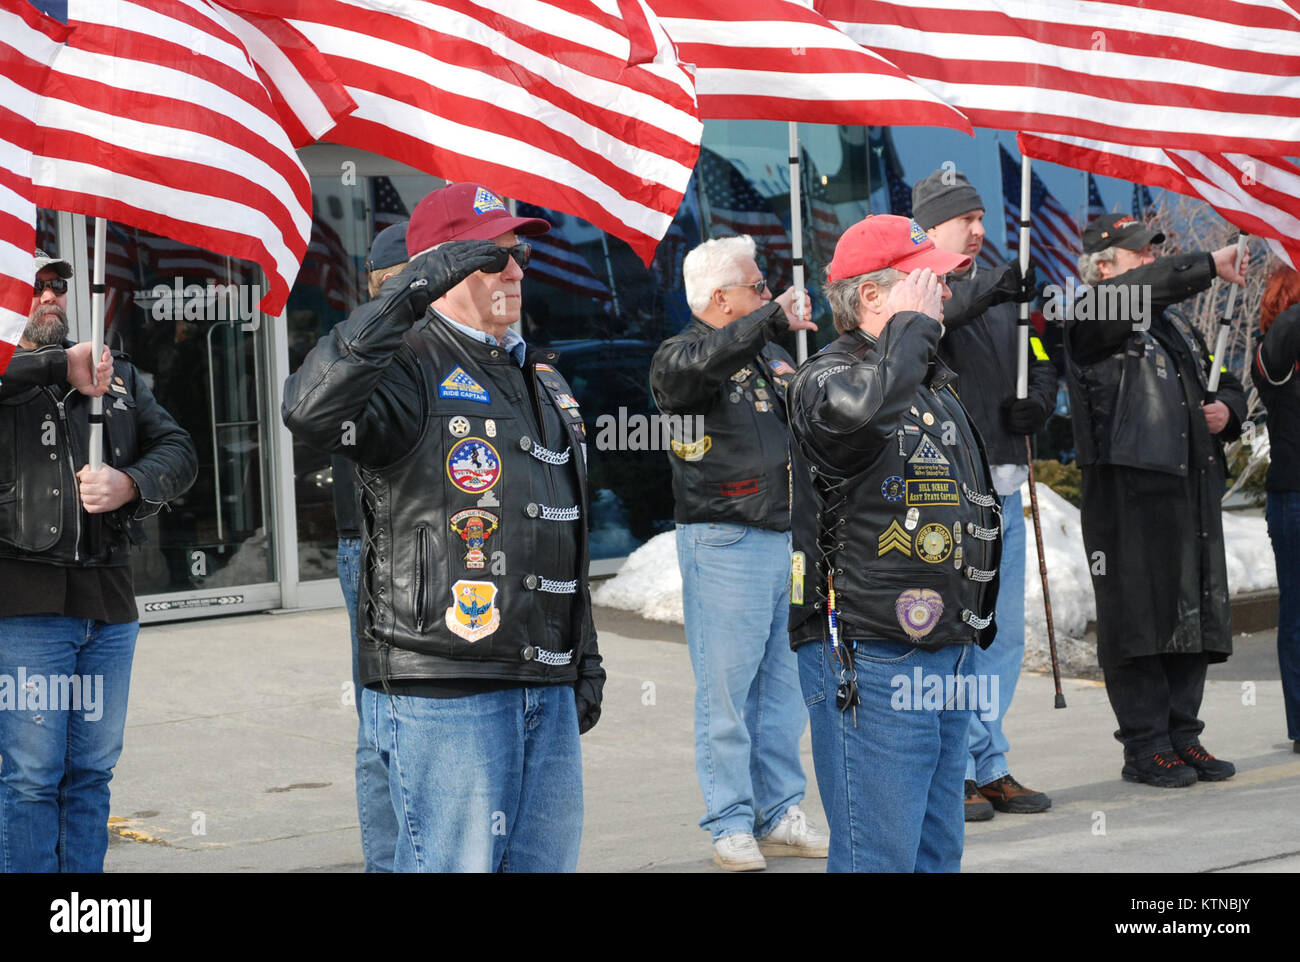 ALBANY, N.Y. – Members of the Capital Region Patriot Guard Riders render honors during the homecoming of New York Army National Guard Soldiers Jan. 8 at Albany International Airport.  Some 200 Soldiers arrived in two flights across the state from the 427th Brigade Support Battalion’s Headquarters Company and Company B following demobilization at Camp Shelby, Miss.  The Soldiers served in Kuwait or Afghanistan as part of the 27th Infantry Brigade Combat Team’s overseas service in 2012.  Patriot Guard Riders have been an enduring presence for military events and ceremonies across the region. U.S Stock Photo